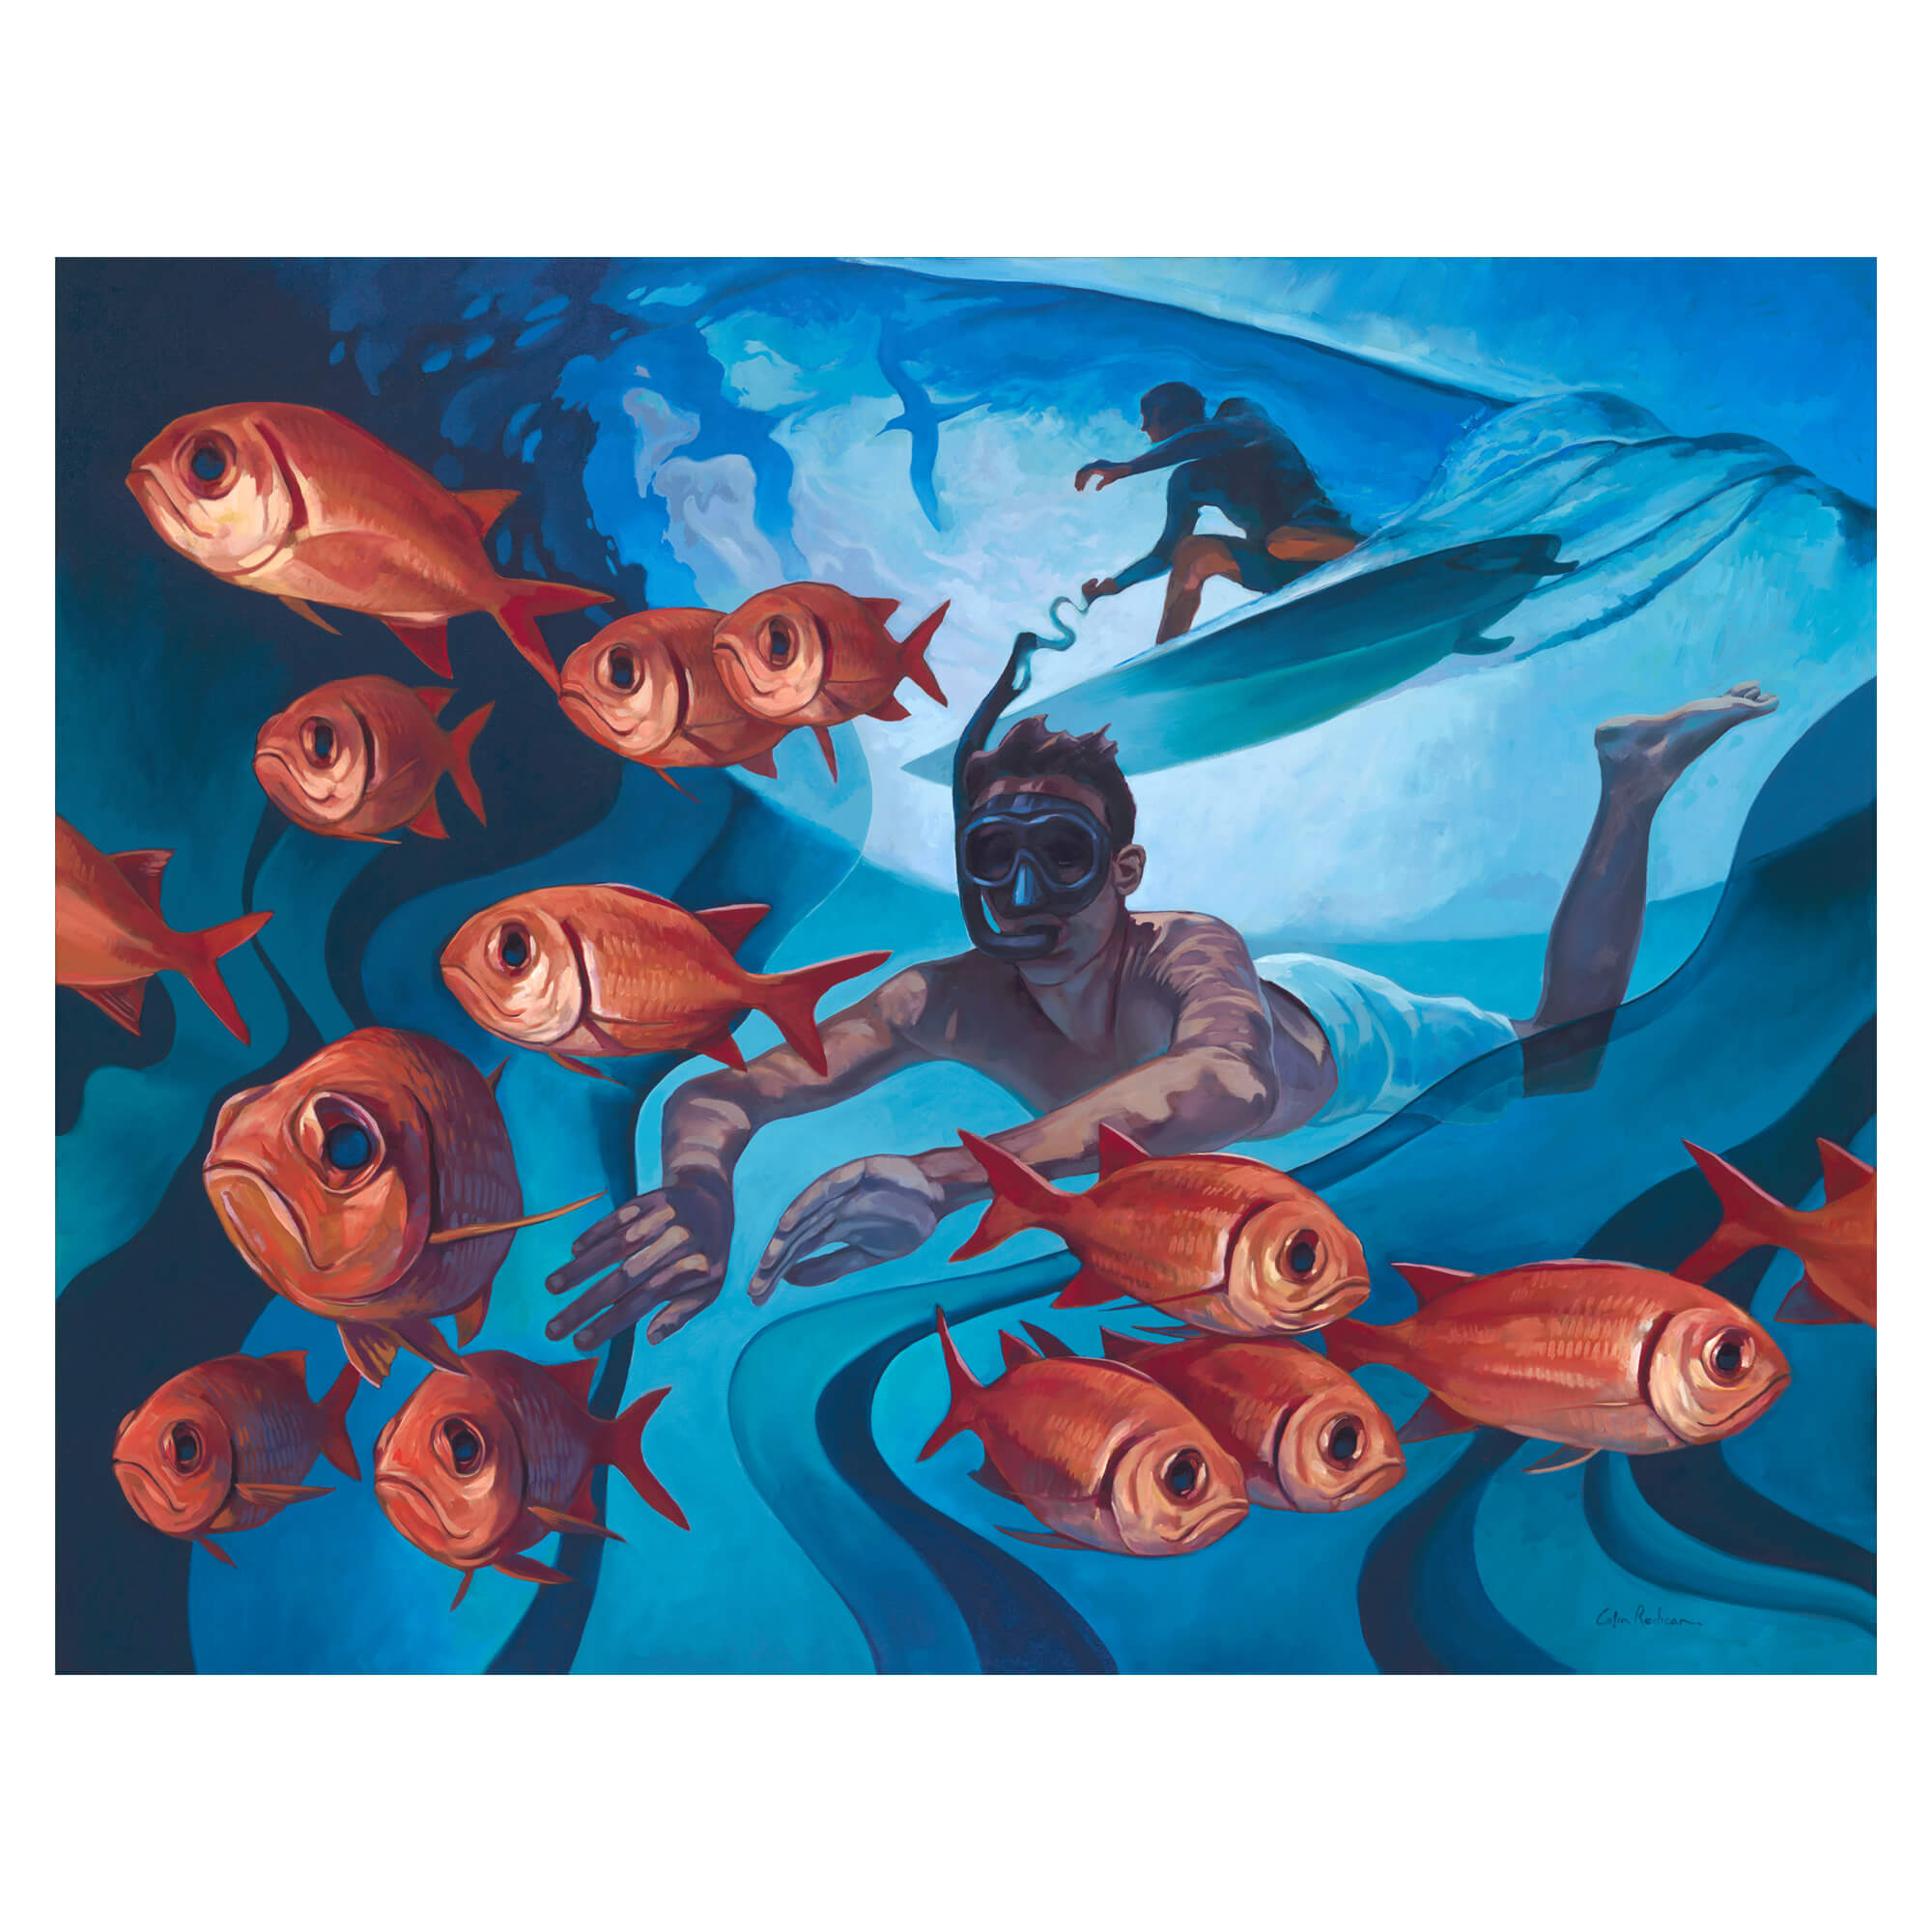 Underwater view of a diver, school of red fish and a surfer by Hawaii artist Colin Redican